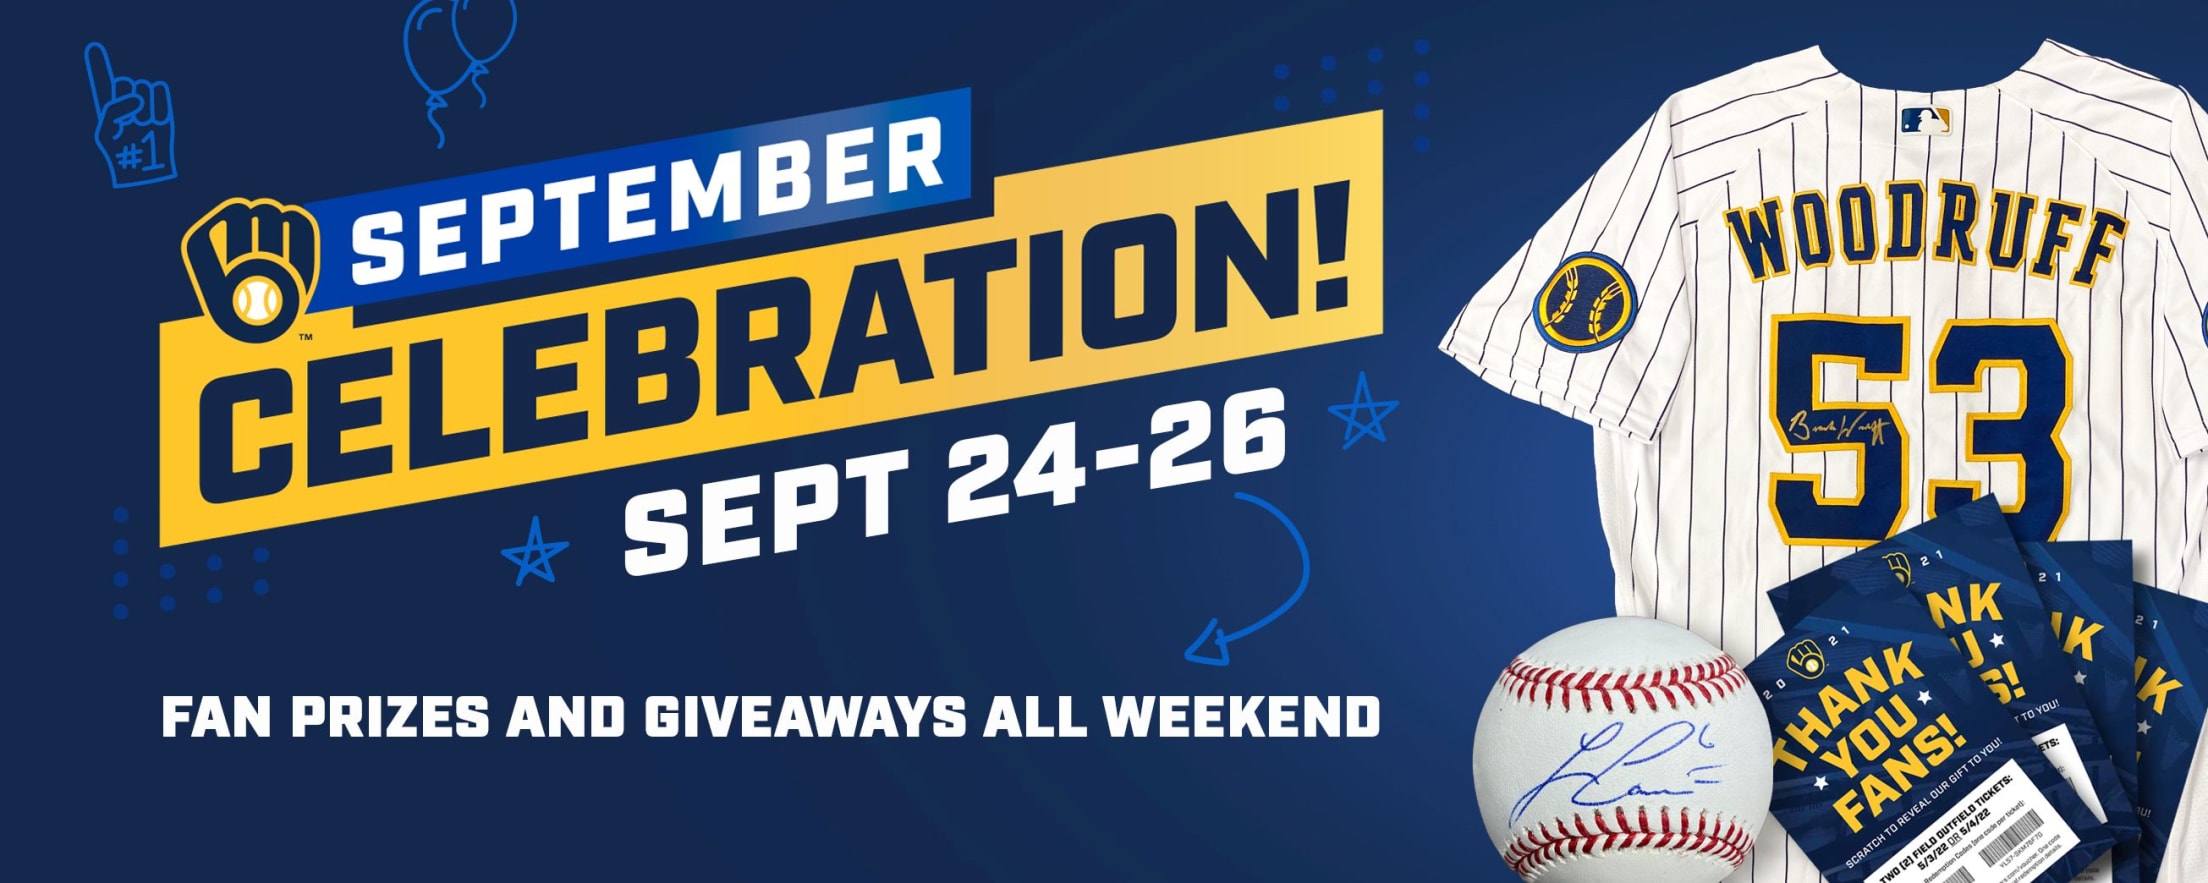 Brewers announce plans for Cerveceros Night on Sept. 17